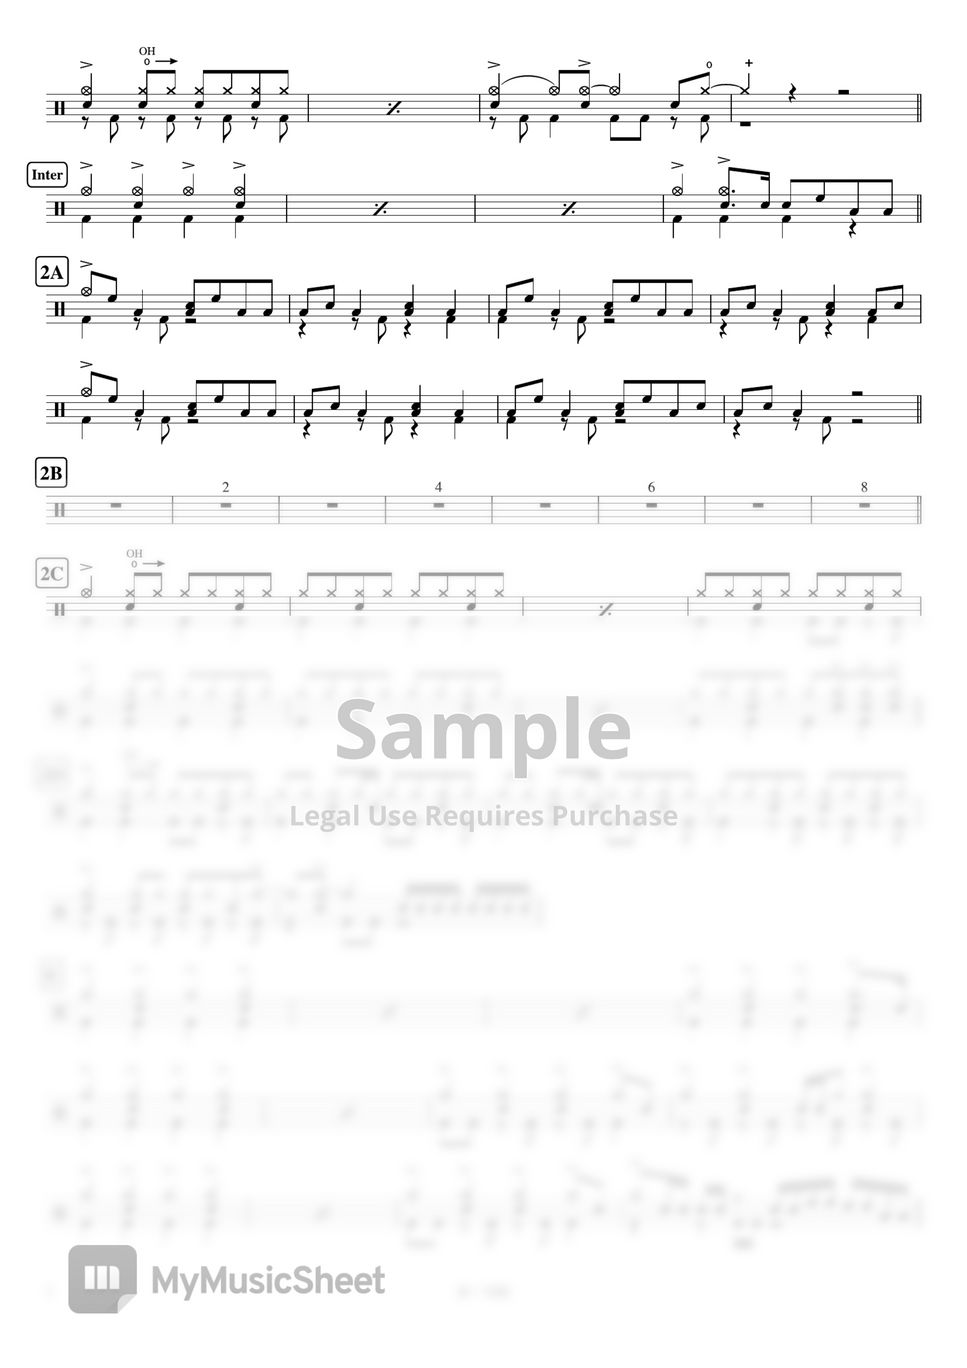 MAN WITH A MISSION × milet - 絆ノ奇跡 (アニメ「鬼滅の刃」刀鍛冶の里編OP主題歌 ) by Cookai's J-pop Drum sheet music!!!